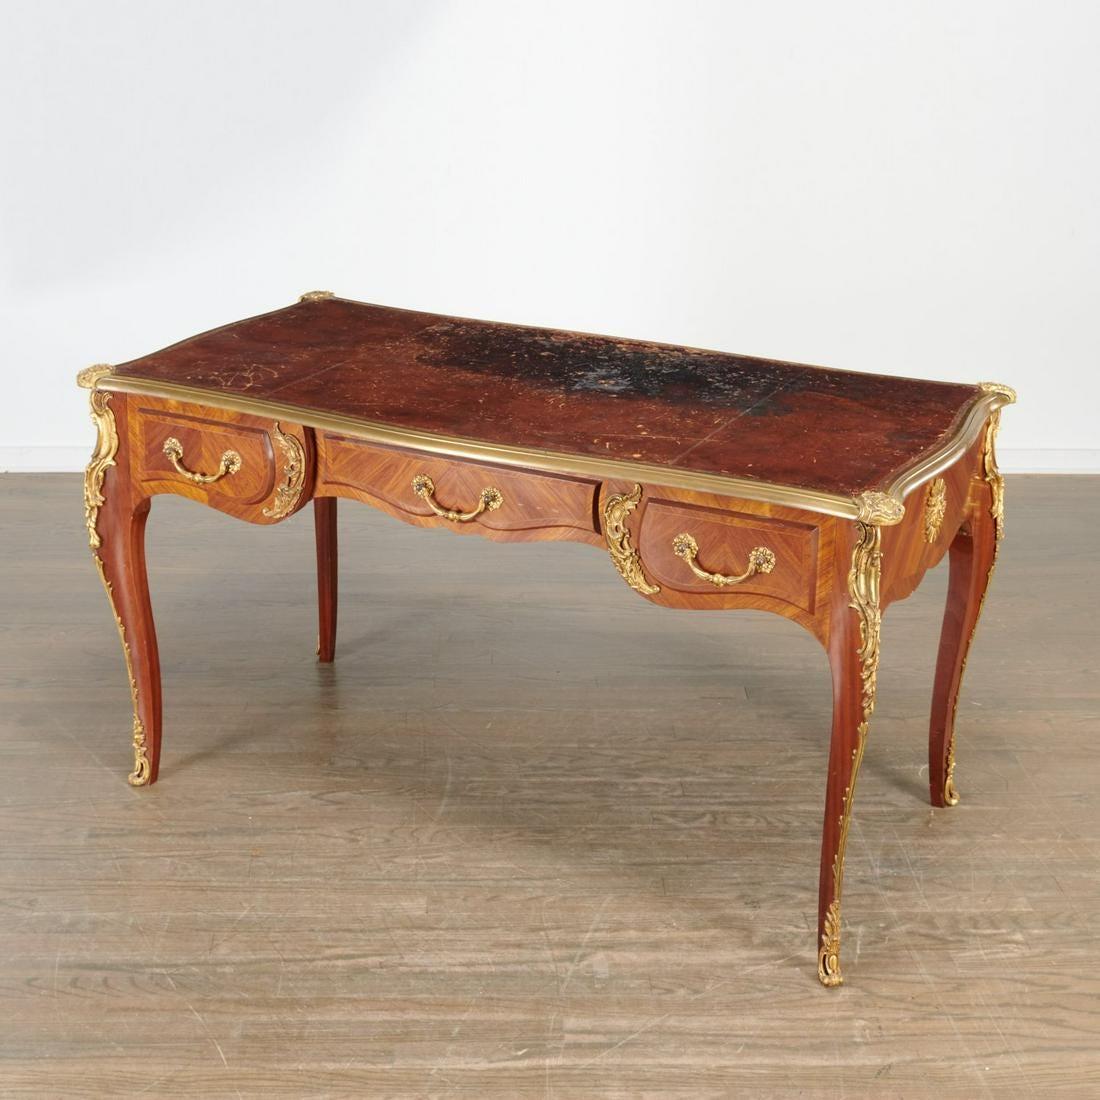 Louis XV style ormolu mounted kingwood bureau plat, 19th c., France, the shaped top with inset tooled leather and bronze rim, over three frieze drawers and faux-drawers on the reverse, the case veneered in chevron-pattern marquetry, the sides